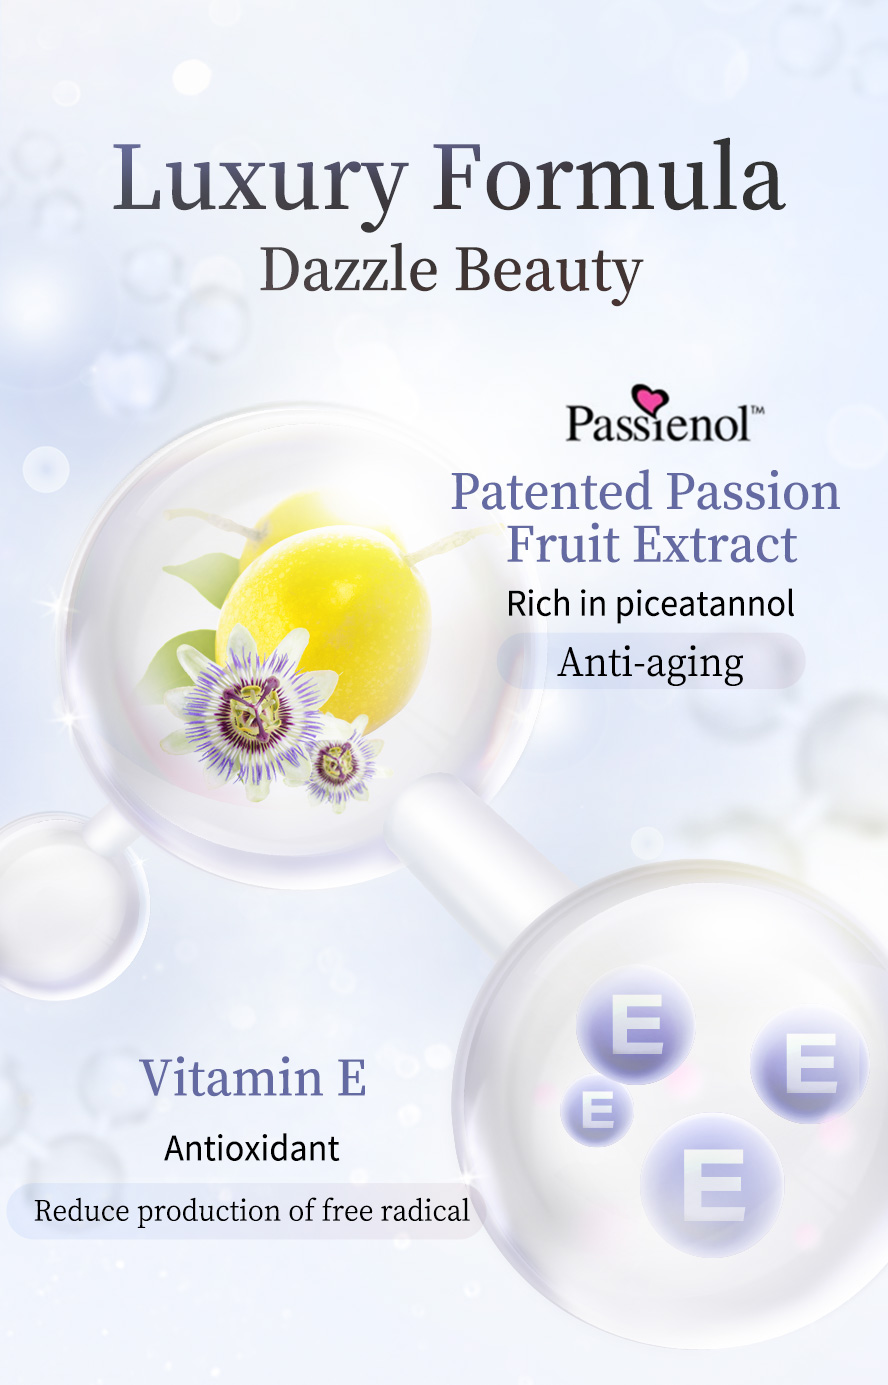 Patented passion fruit extract is rich in piceatannol which can promote youthful skin & vitamin e to reduce the produce of free radical